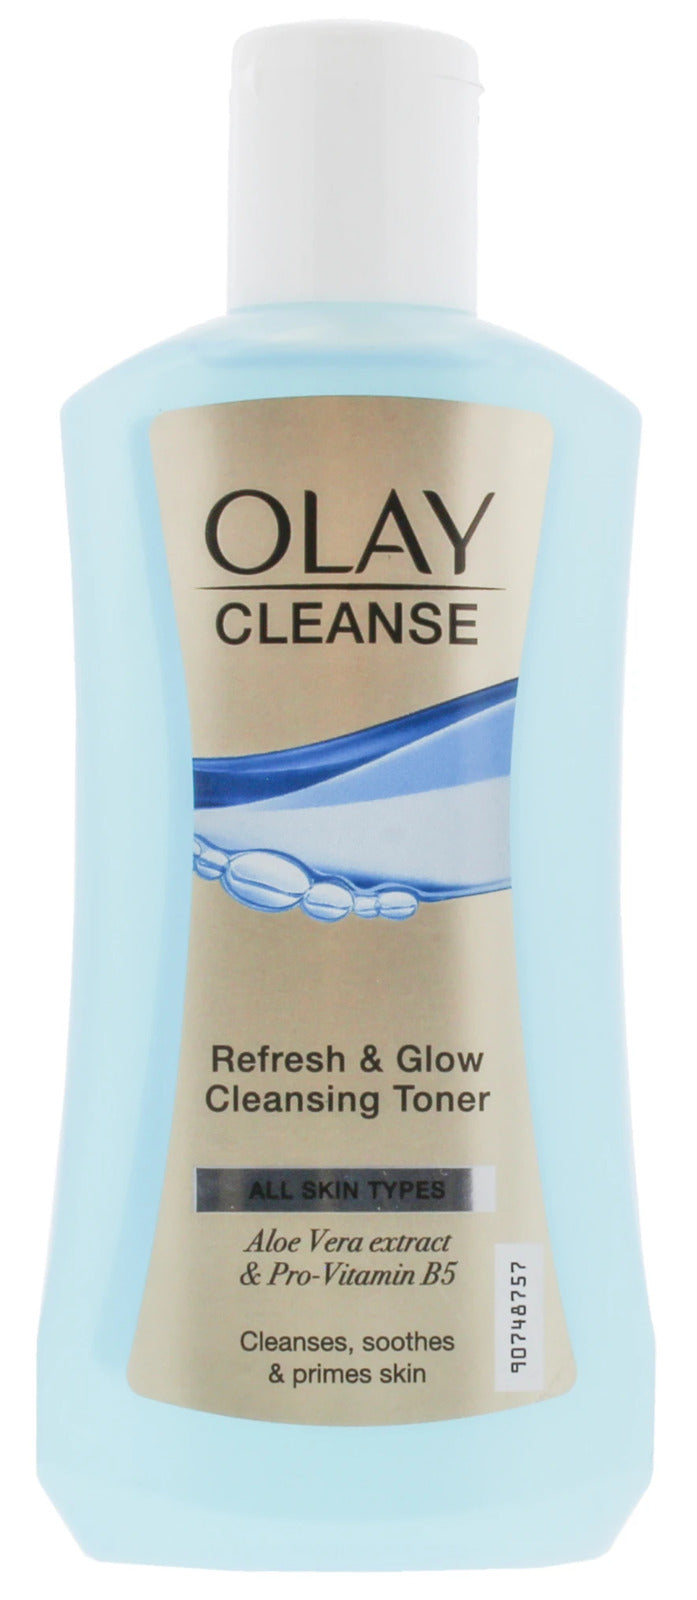 Olay: Cleansing Toner - Refresh & Glow (200ml)